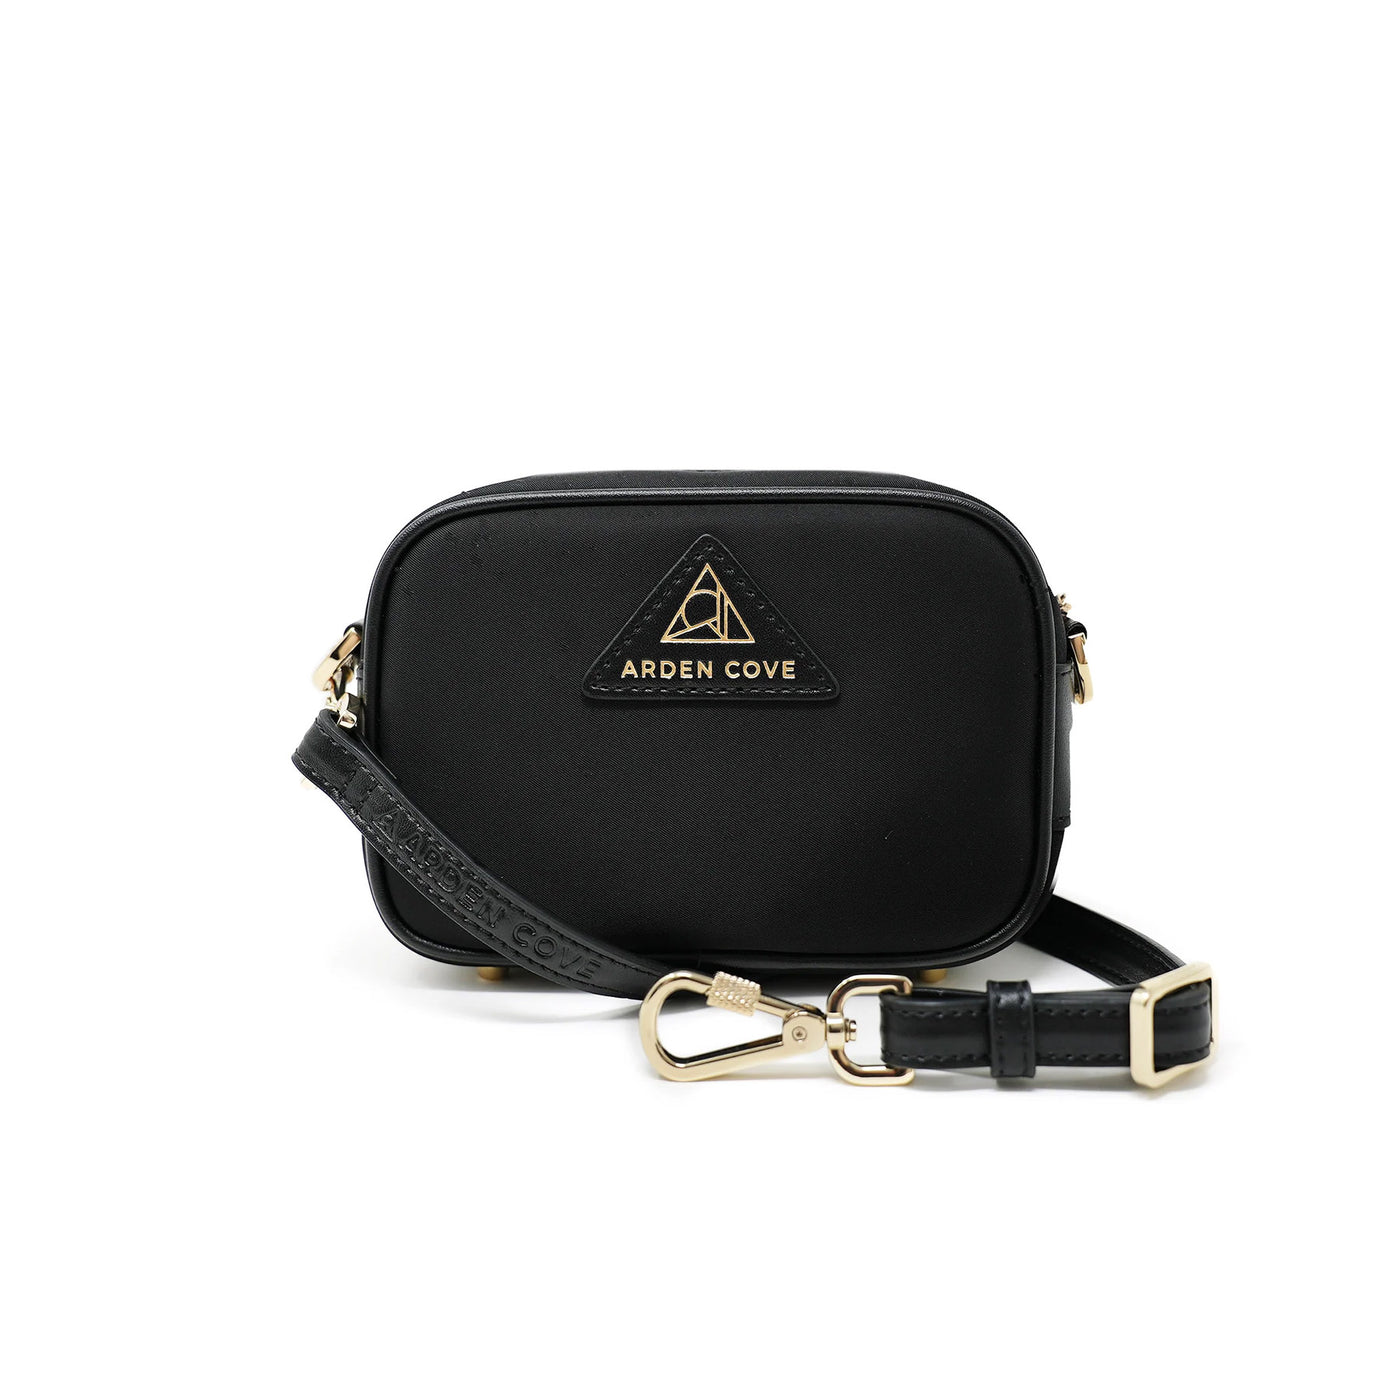 Anti-theft Water-resistant Travel Crossbody - Crissy Mini Crossbody in Black Gold with slash-resistant faux leather & locking clasps straps - front view - Arden Cove